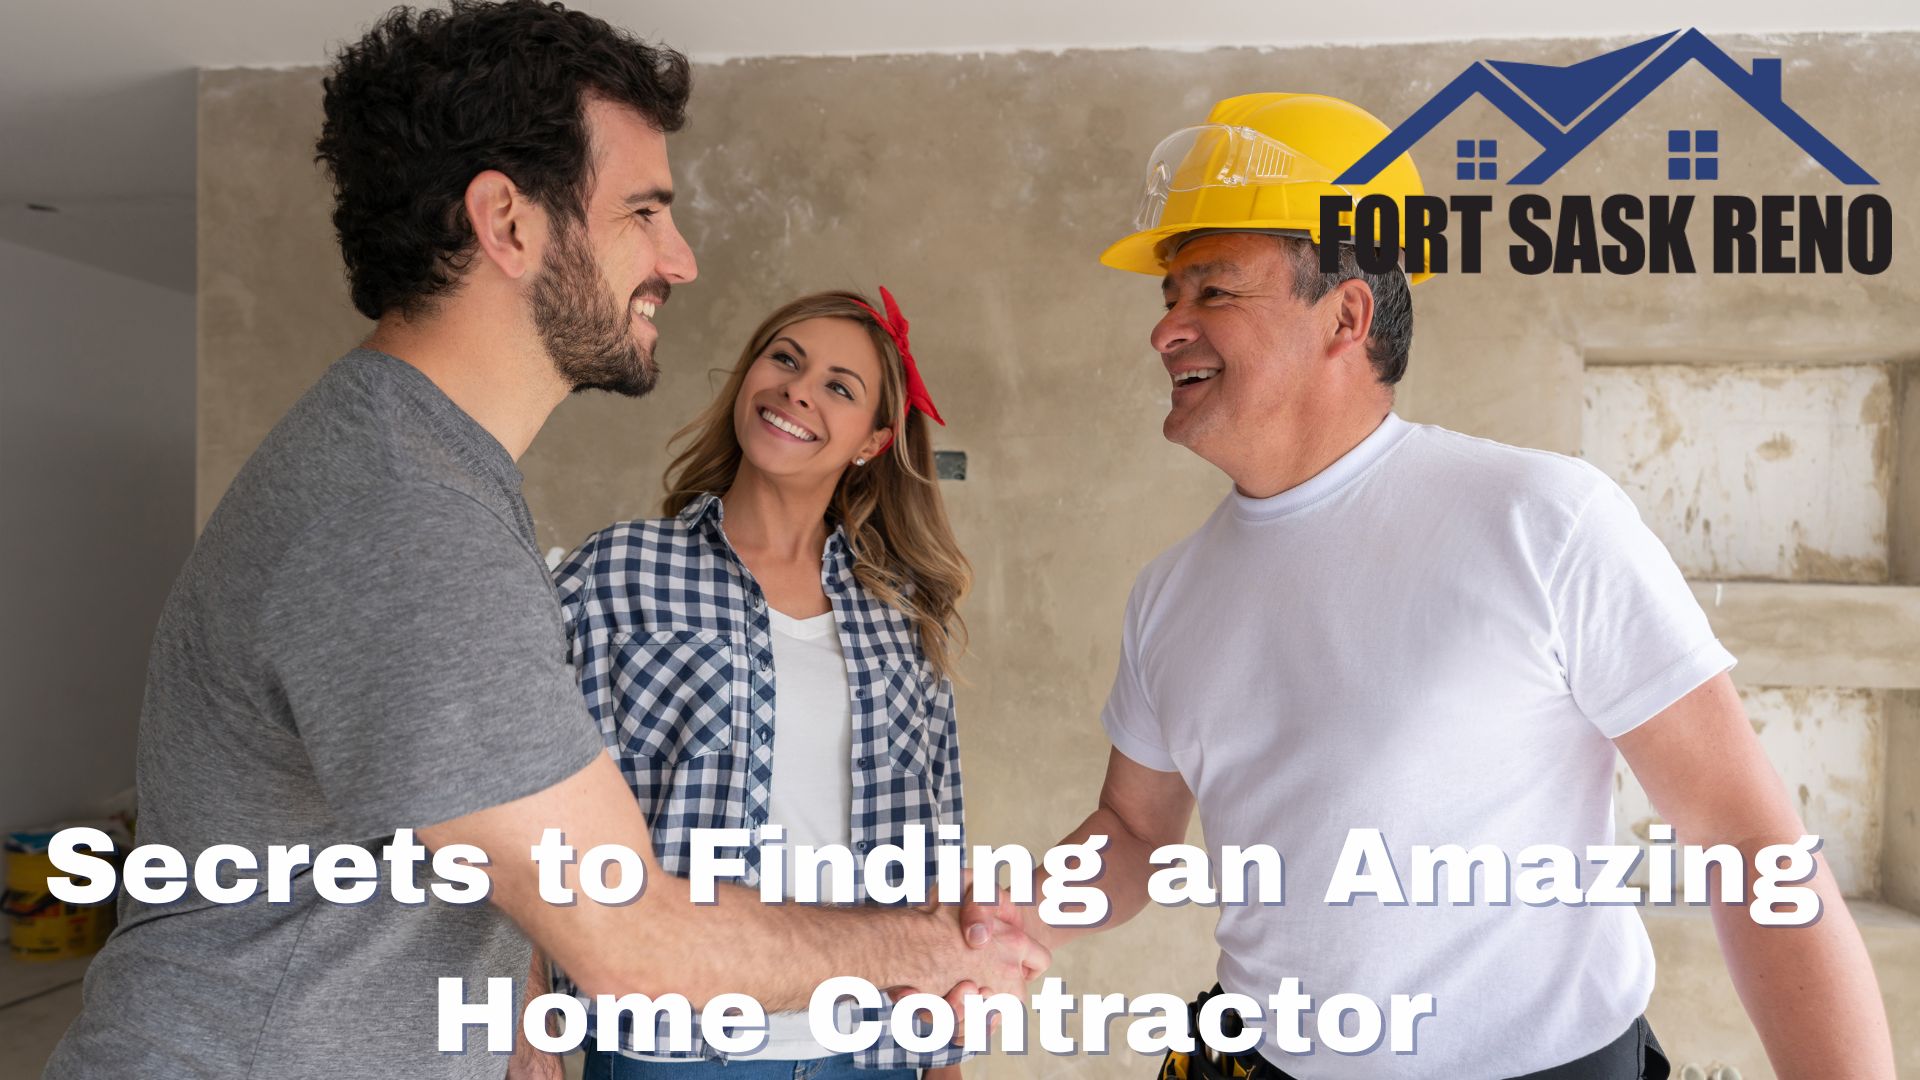 Secrets to Finding an Amazing Home Contractor